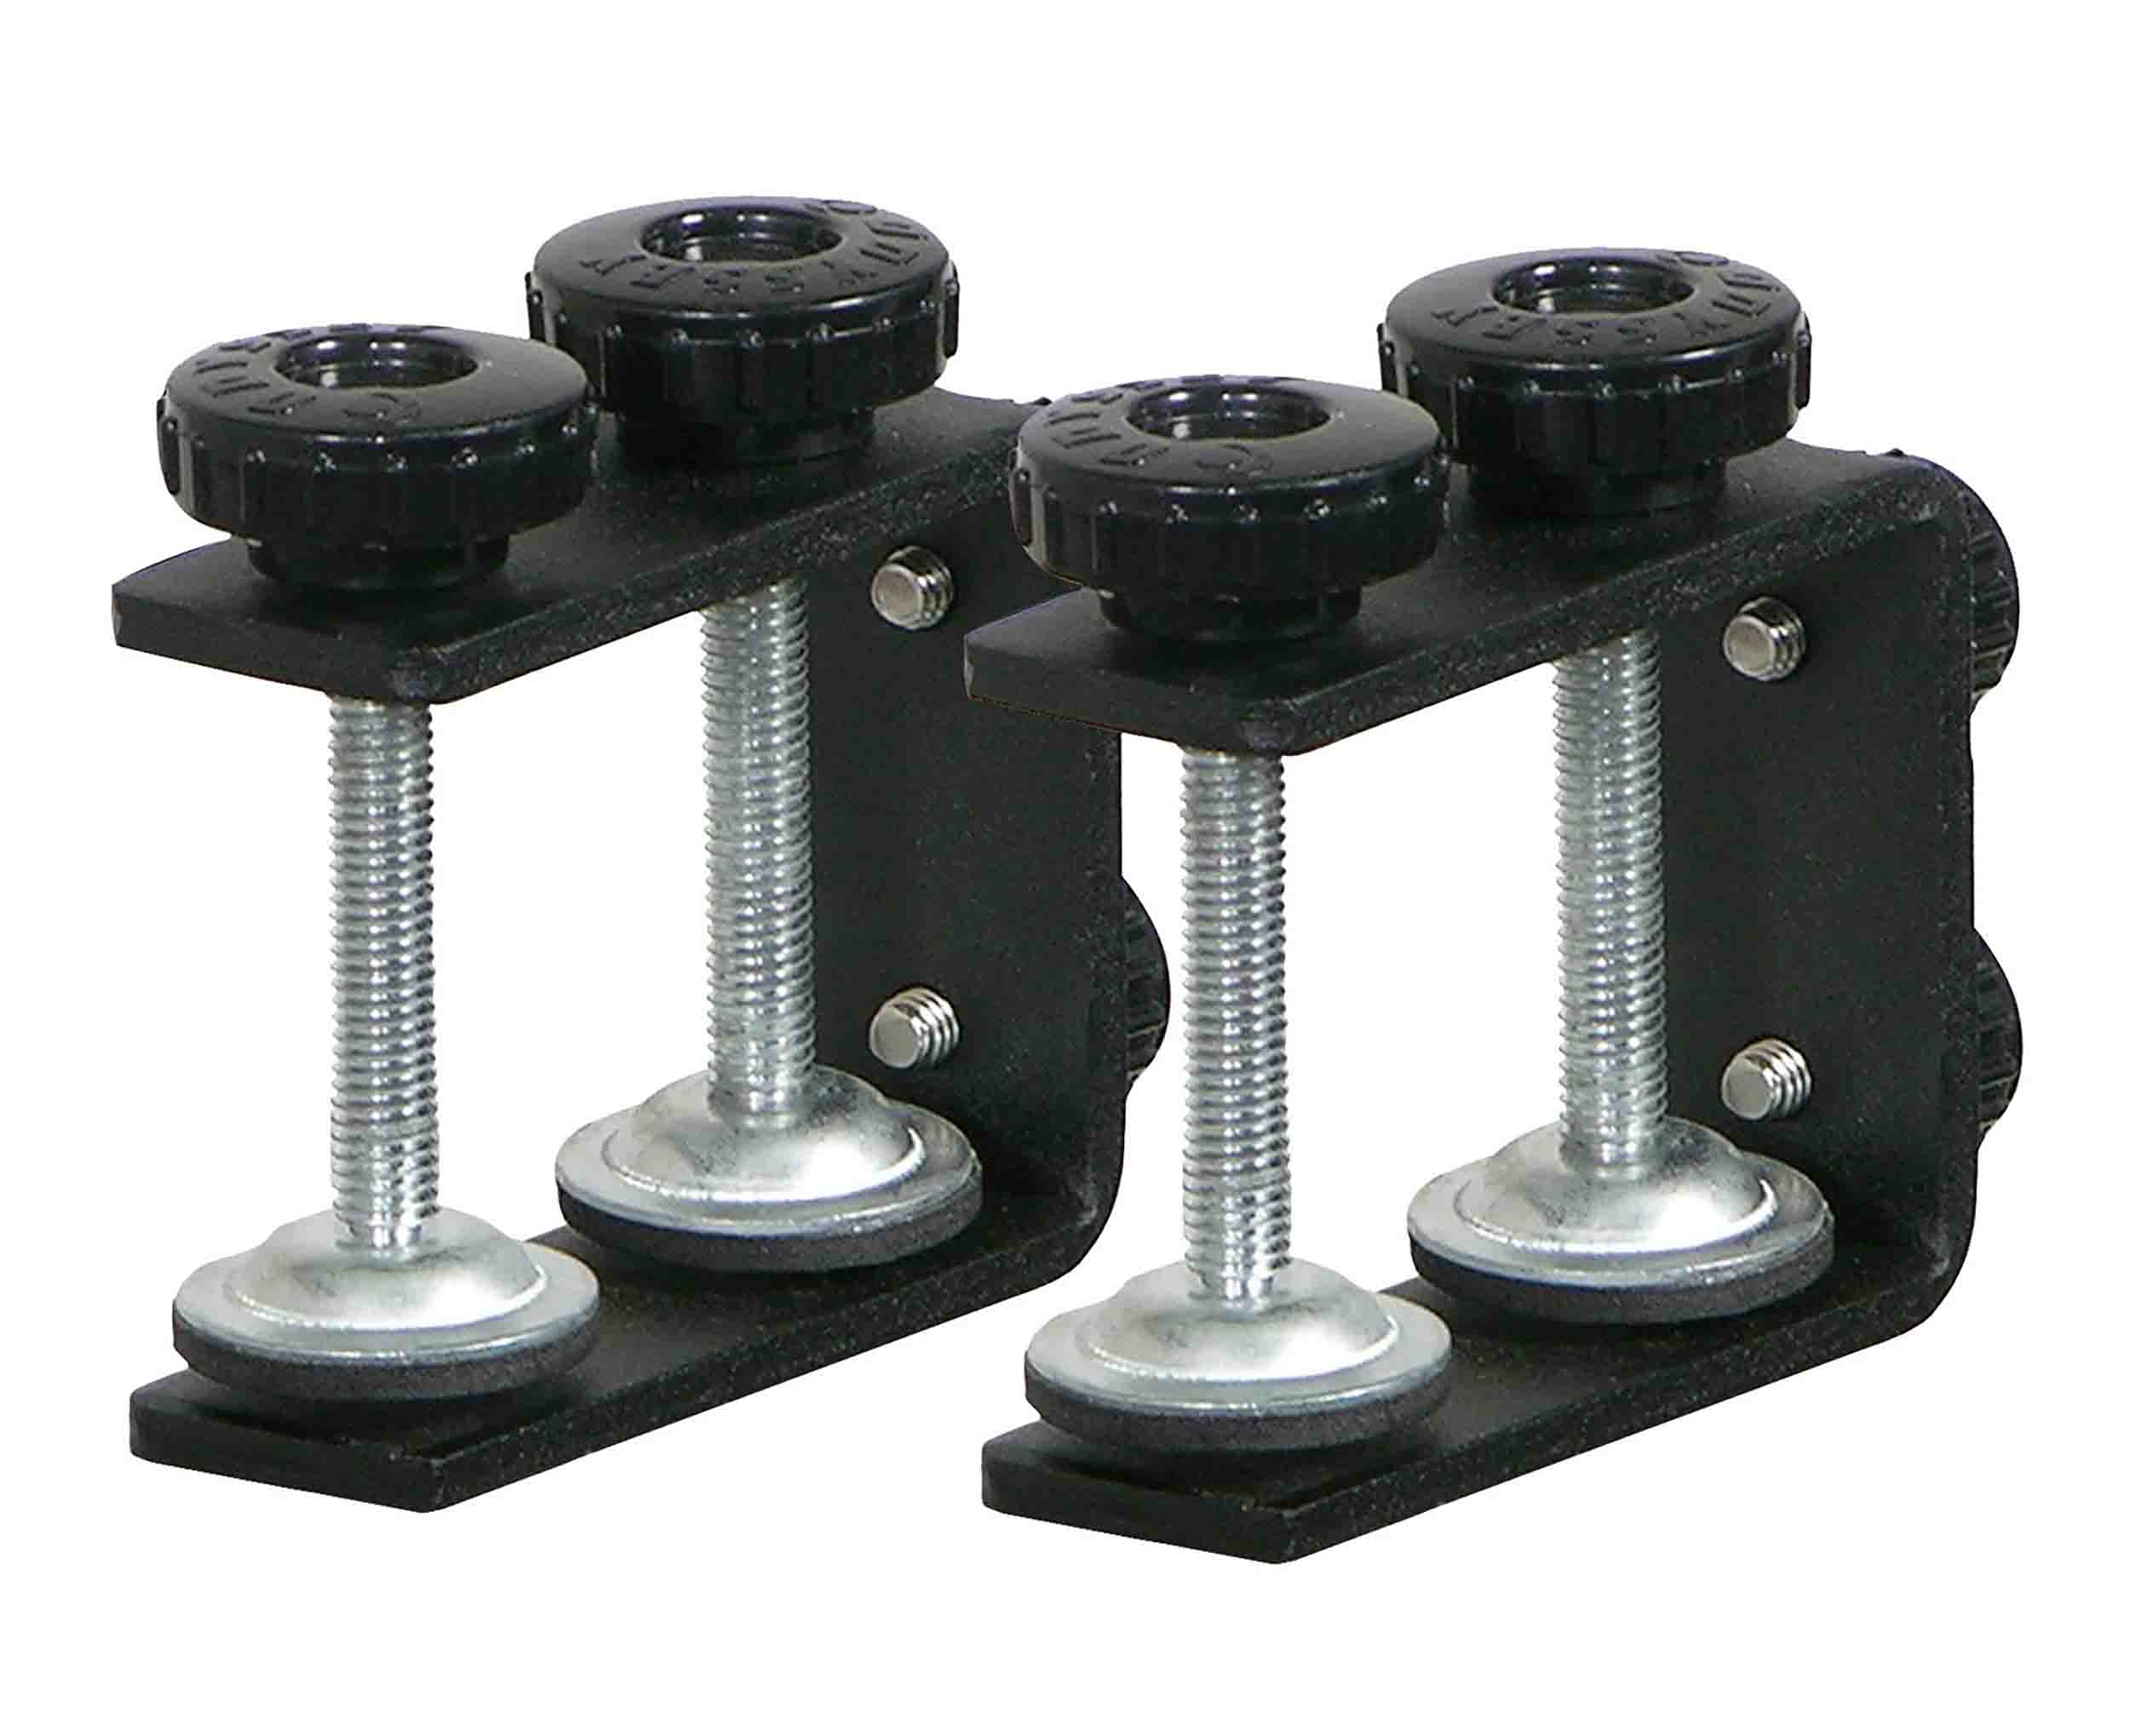 Odyssey LSTANDCLAMPS Set of 2 Clamps for Laptop Stands - Black - Hollywood DJ